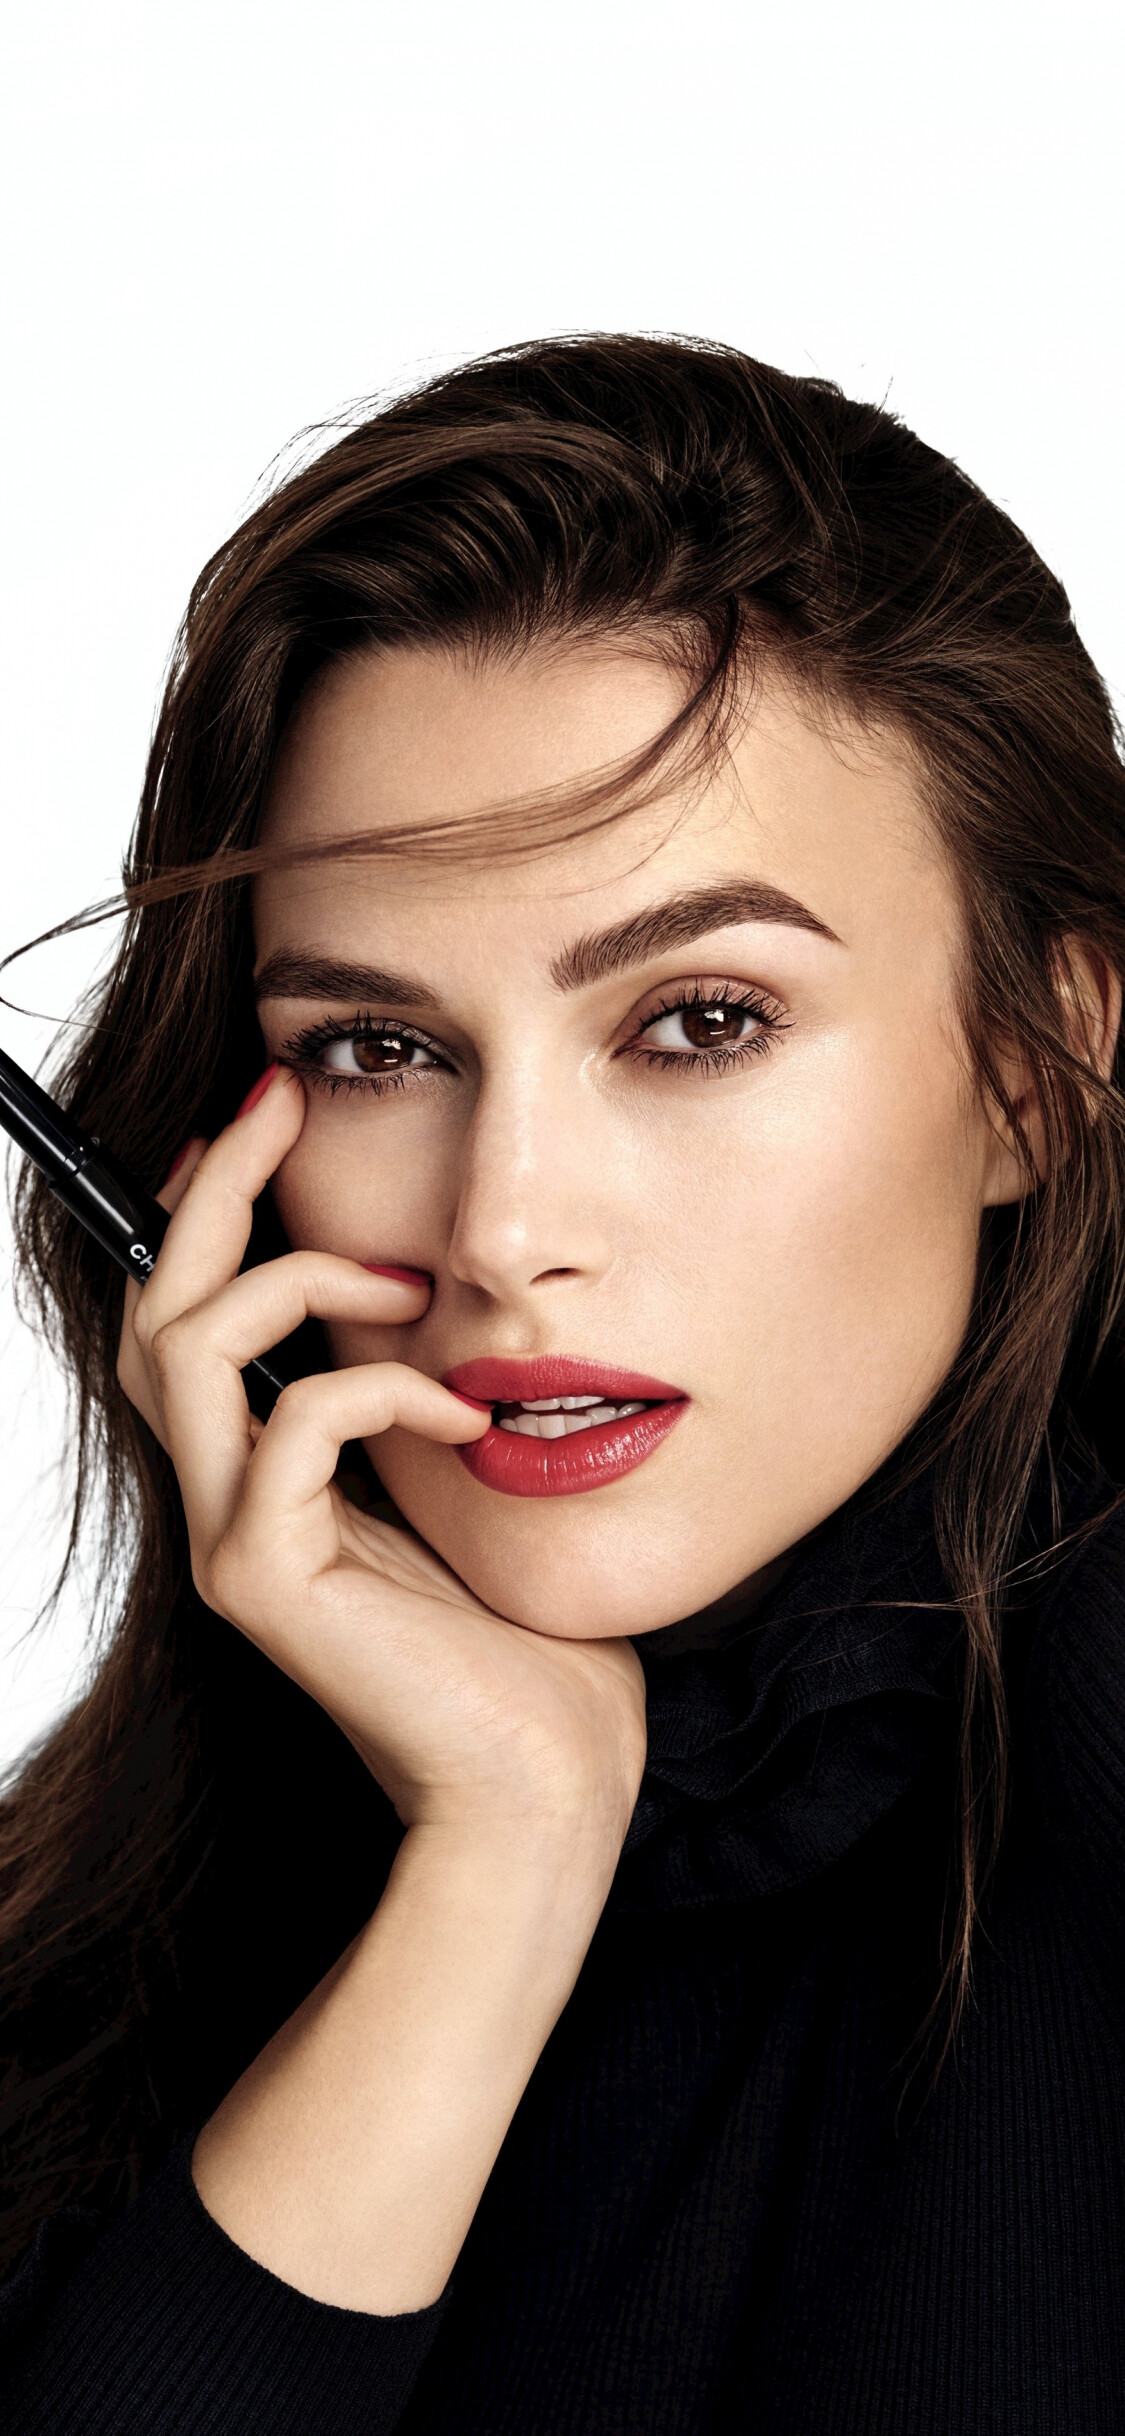 Keira Knightley, Actress, Red lips, iPhone wallpaper, 1130x2440 HD Phone